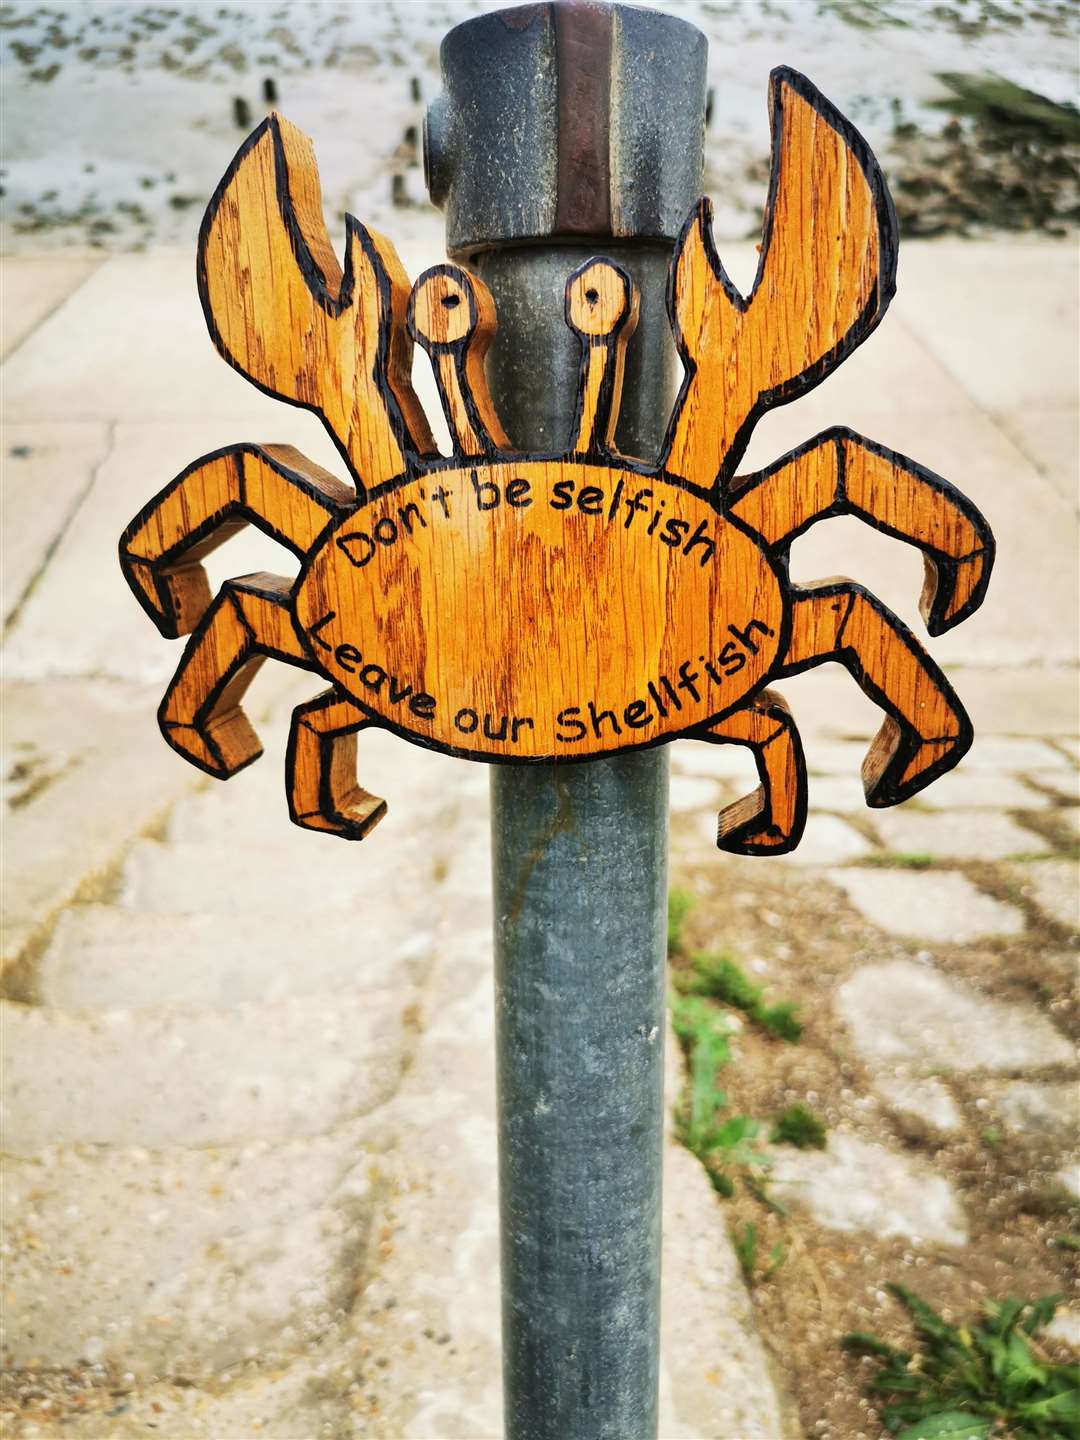 The community in Grain has created signs requesting beach combers not to take shellfish away